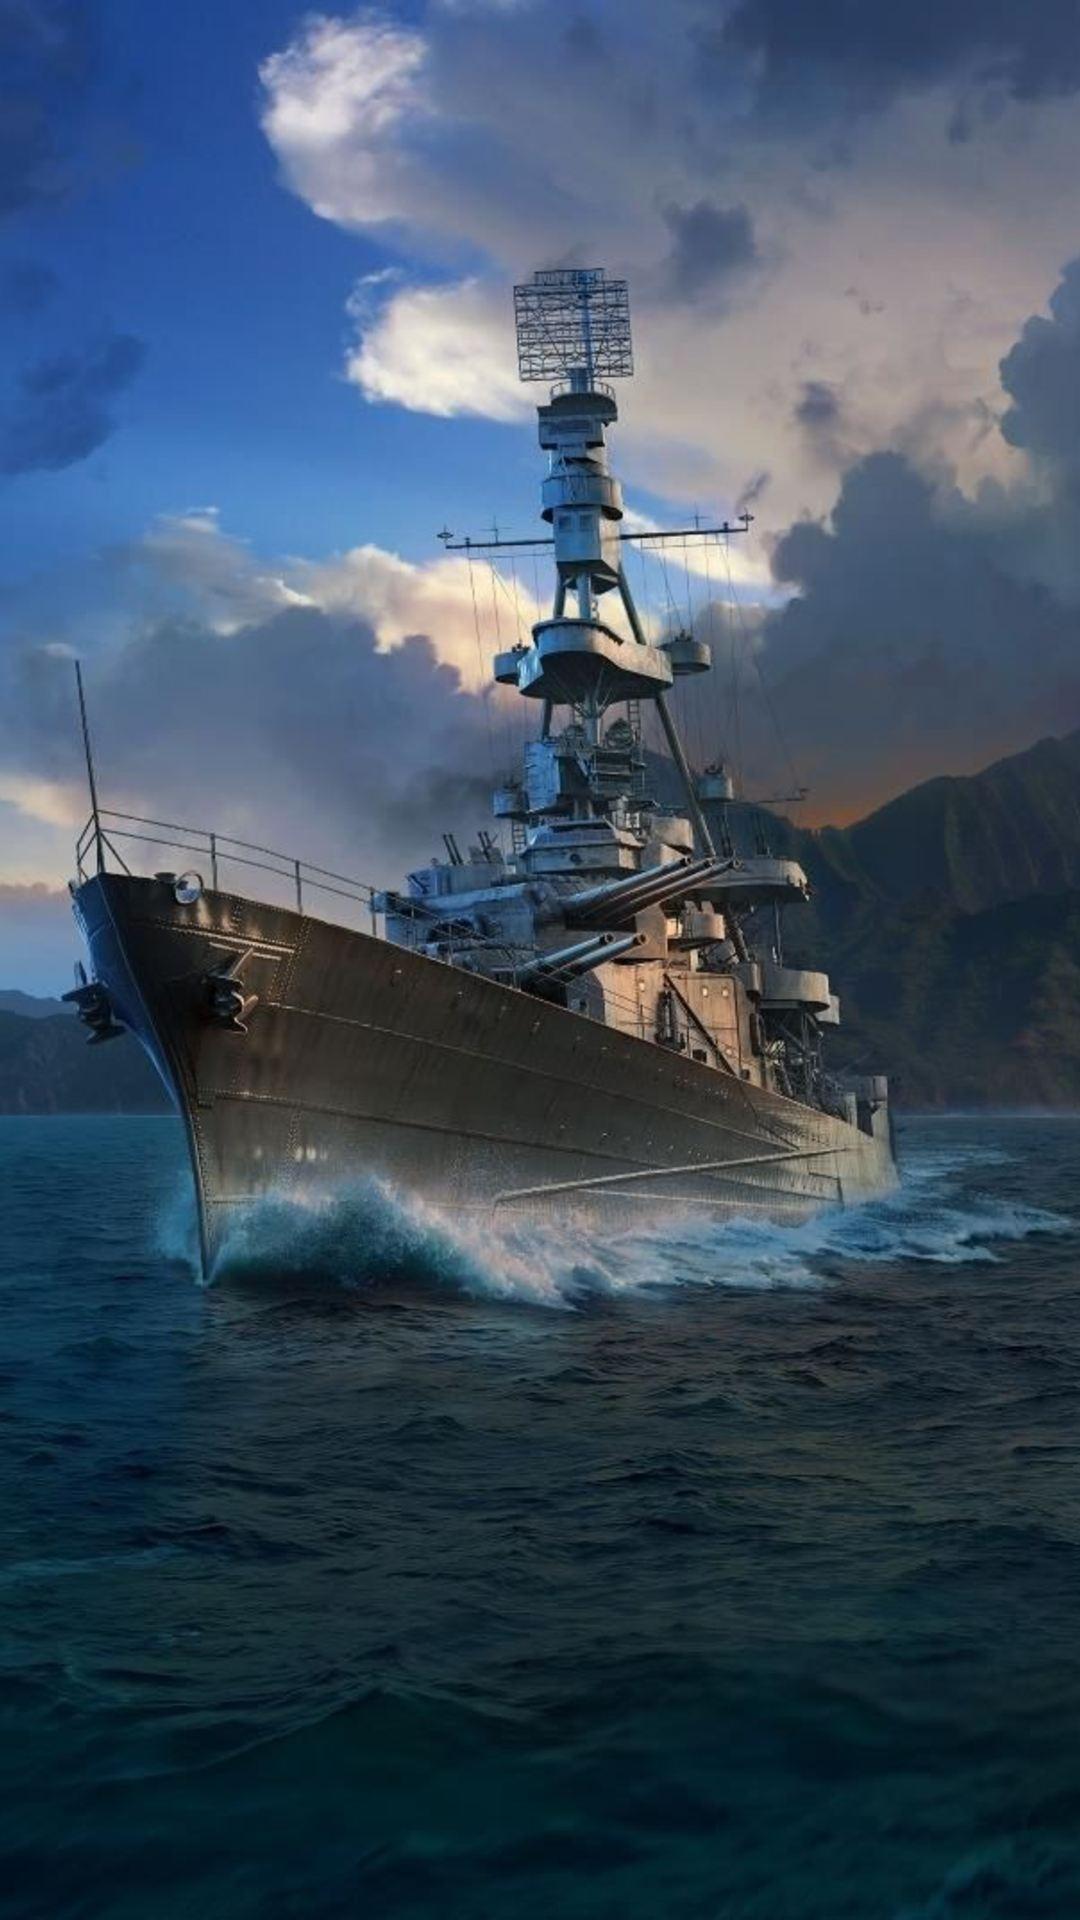 World Of Warships Wallpapers - Wallpaper Cave